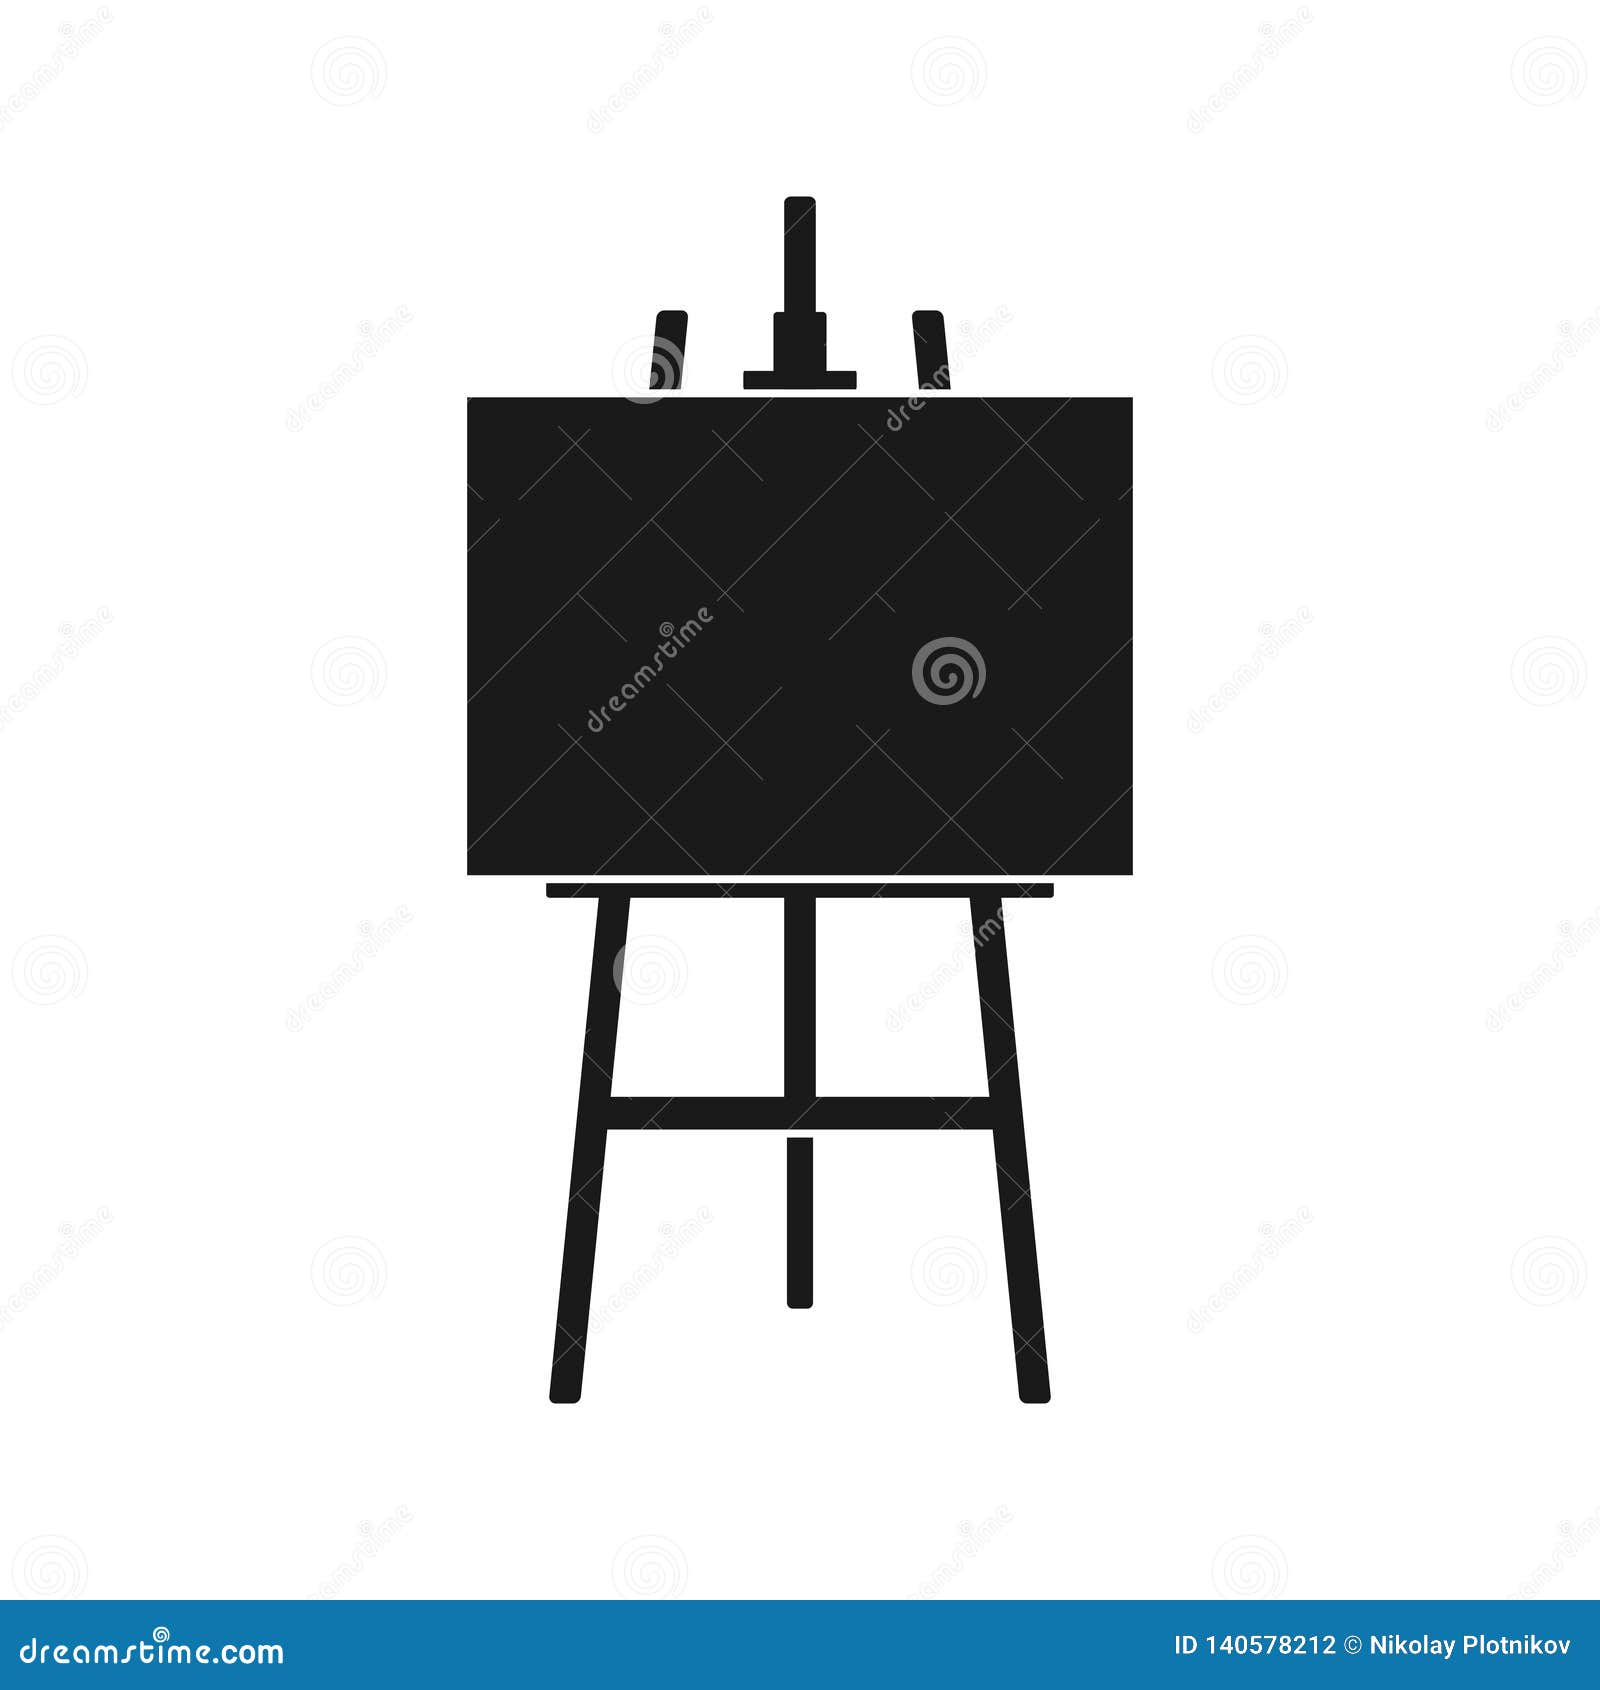 Artists Drawing Board Stock Vector by ©wingnutdesigns 64144517